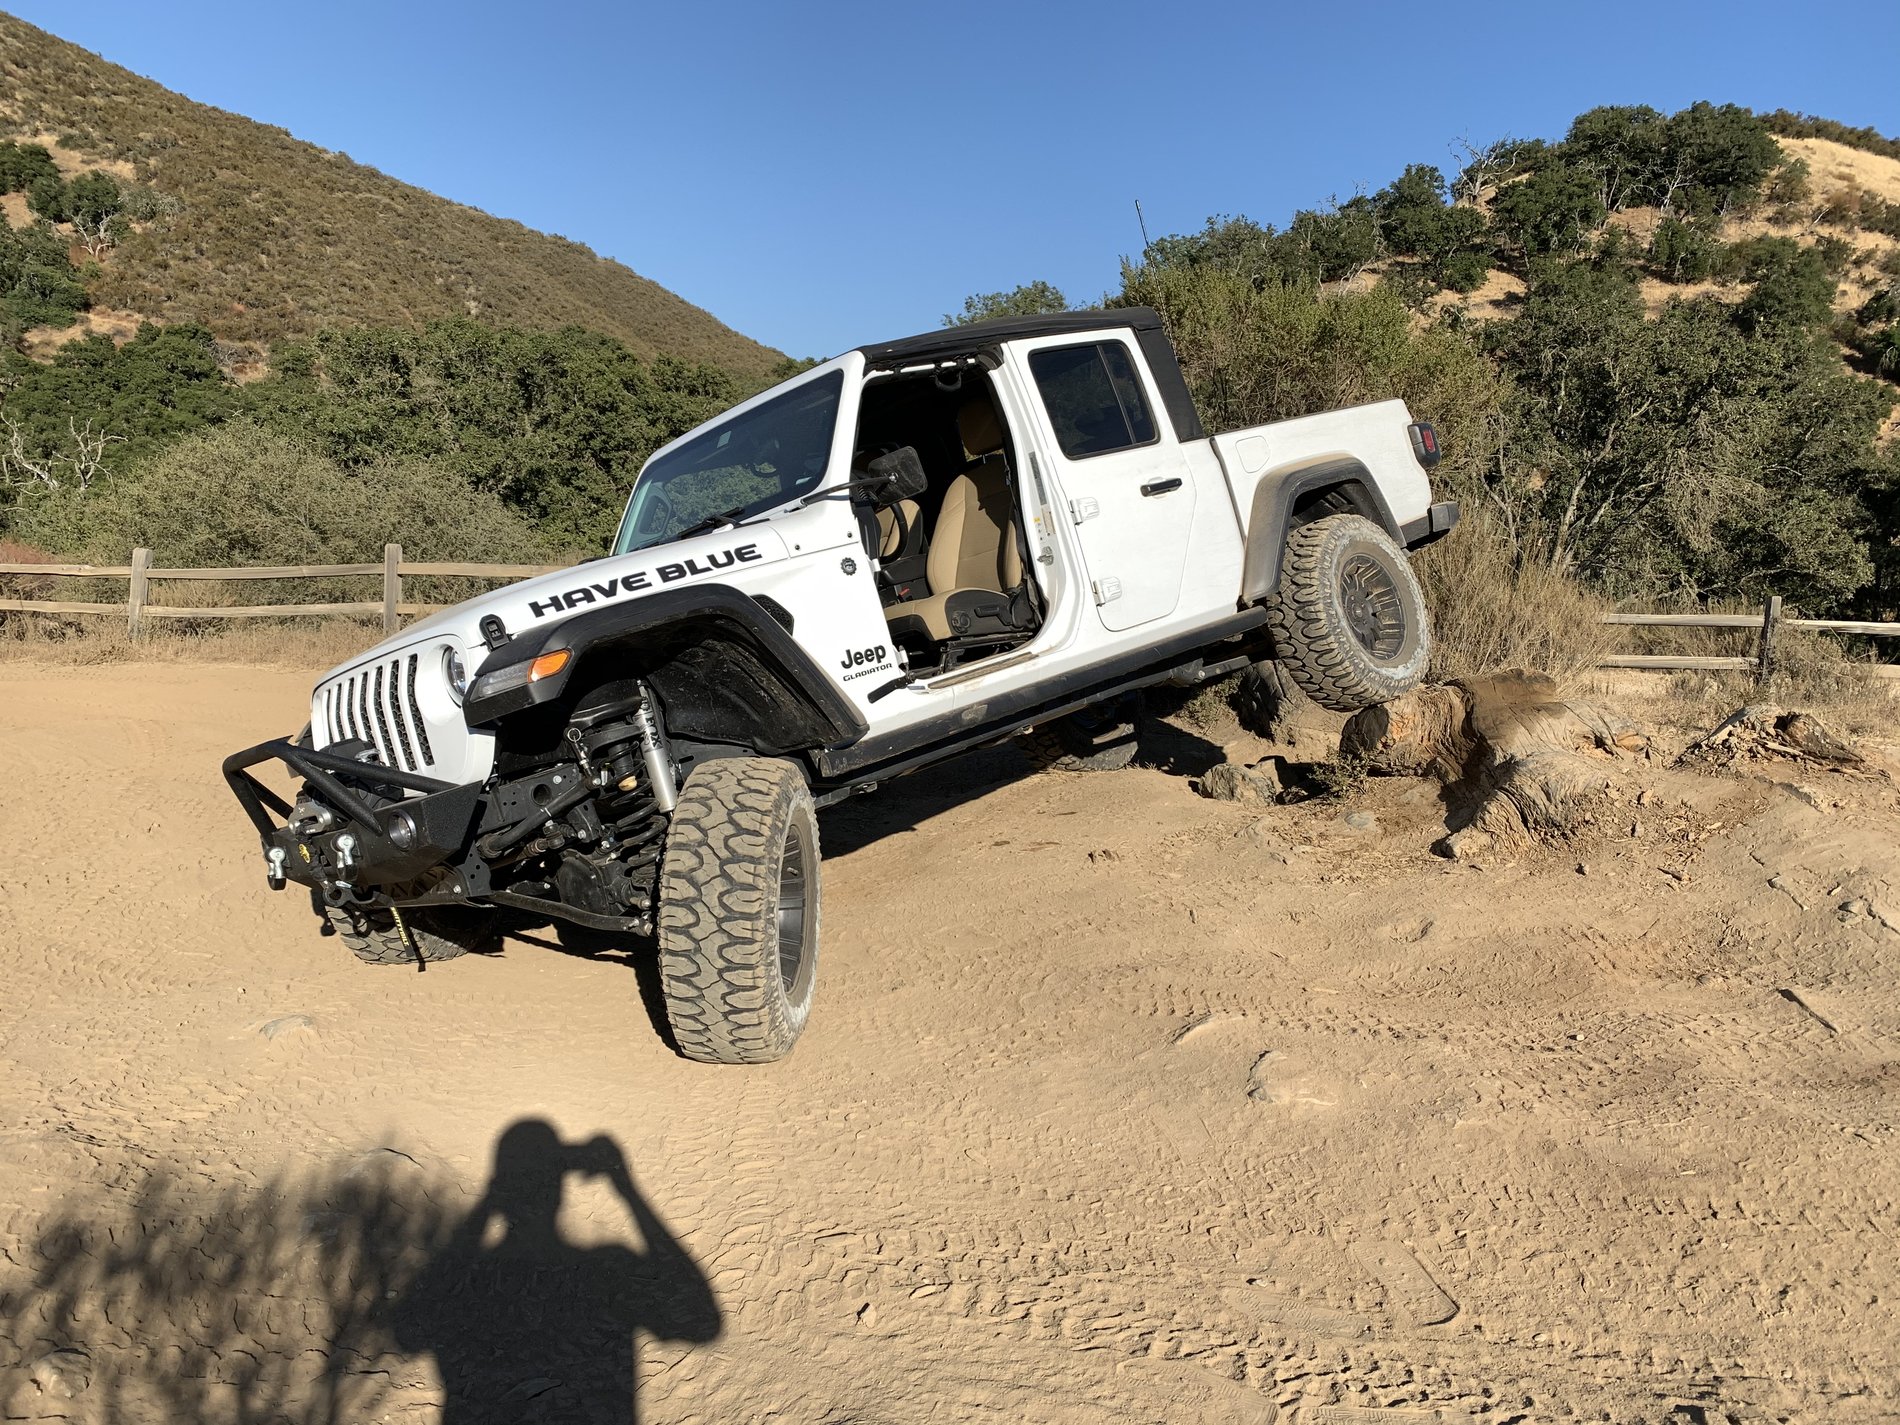 Jeep Gladiator -- 2020+ Gladiator Picture Game -- 7634F83F-7769-4A55-BF4F-8B5A2D599225